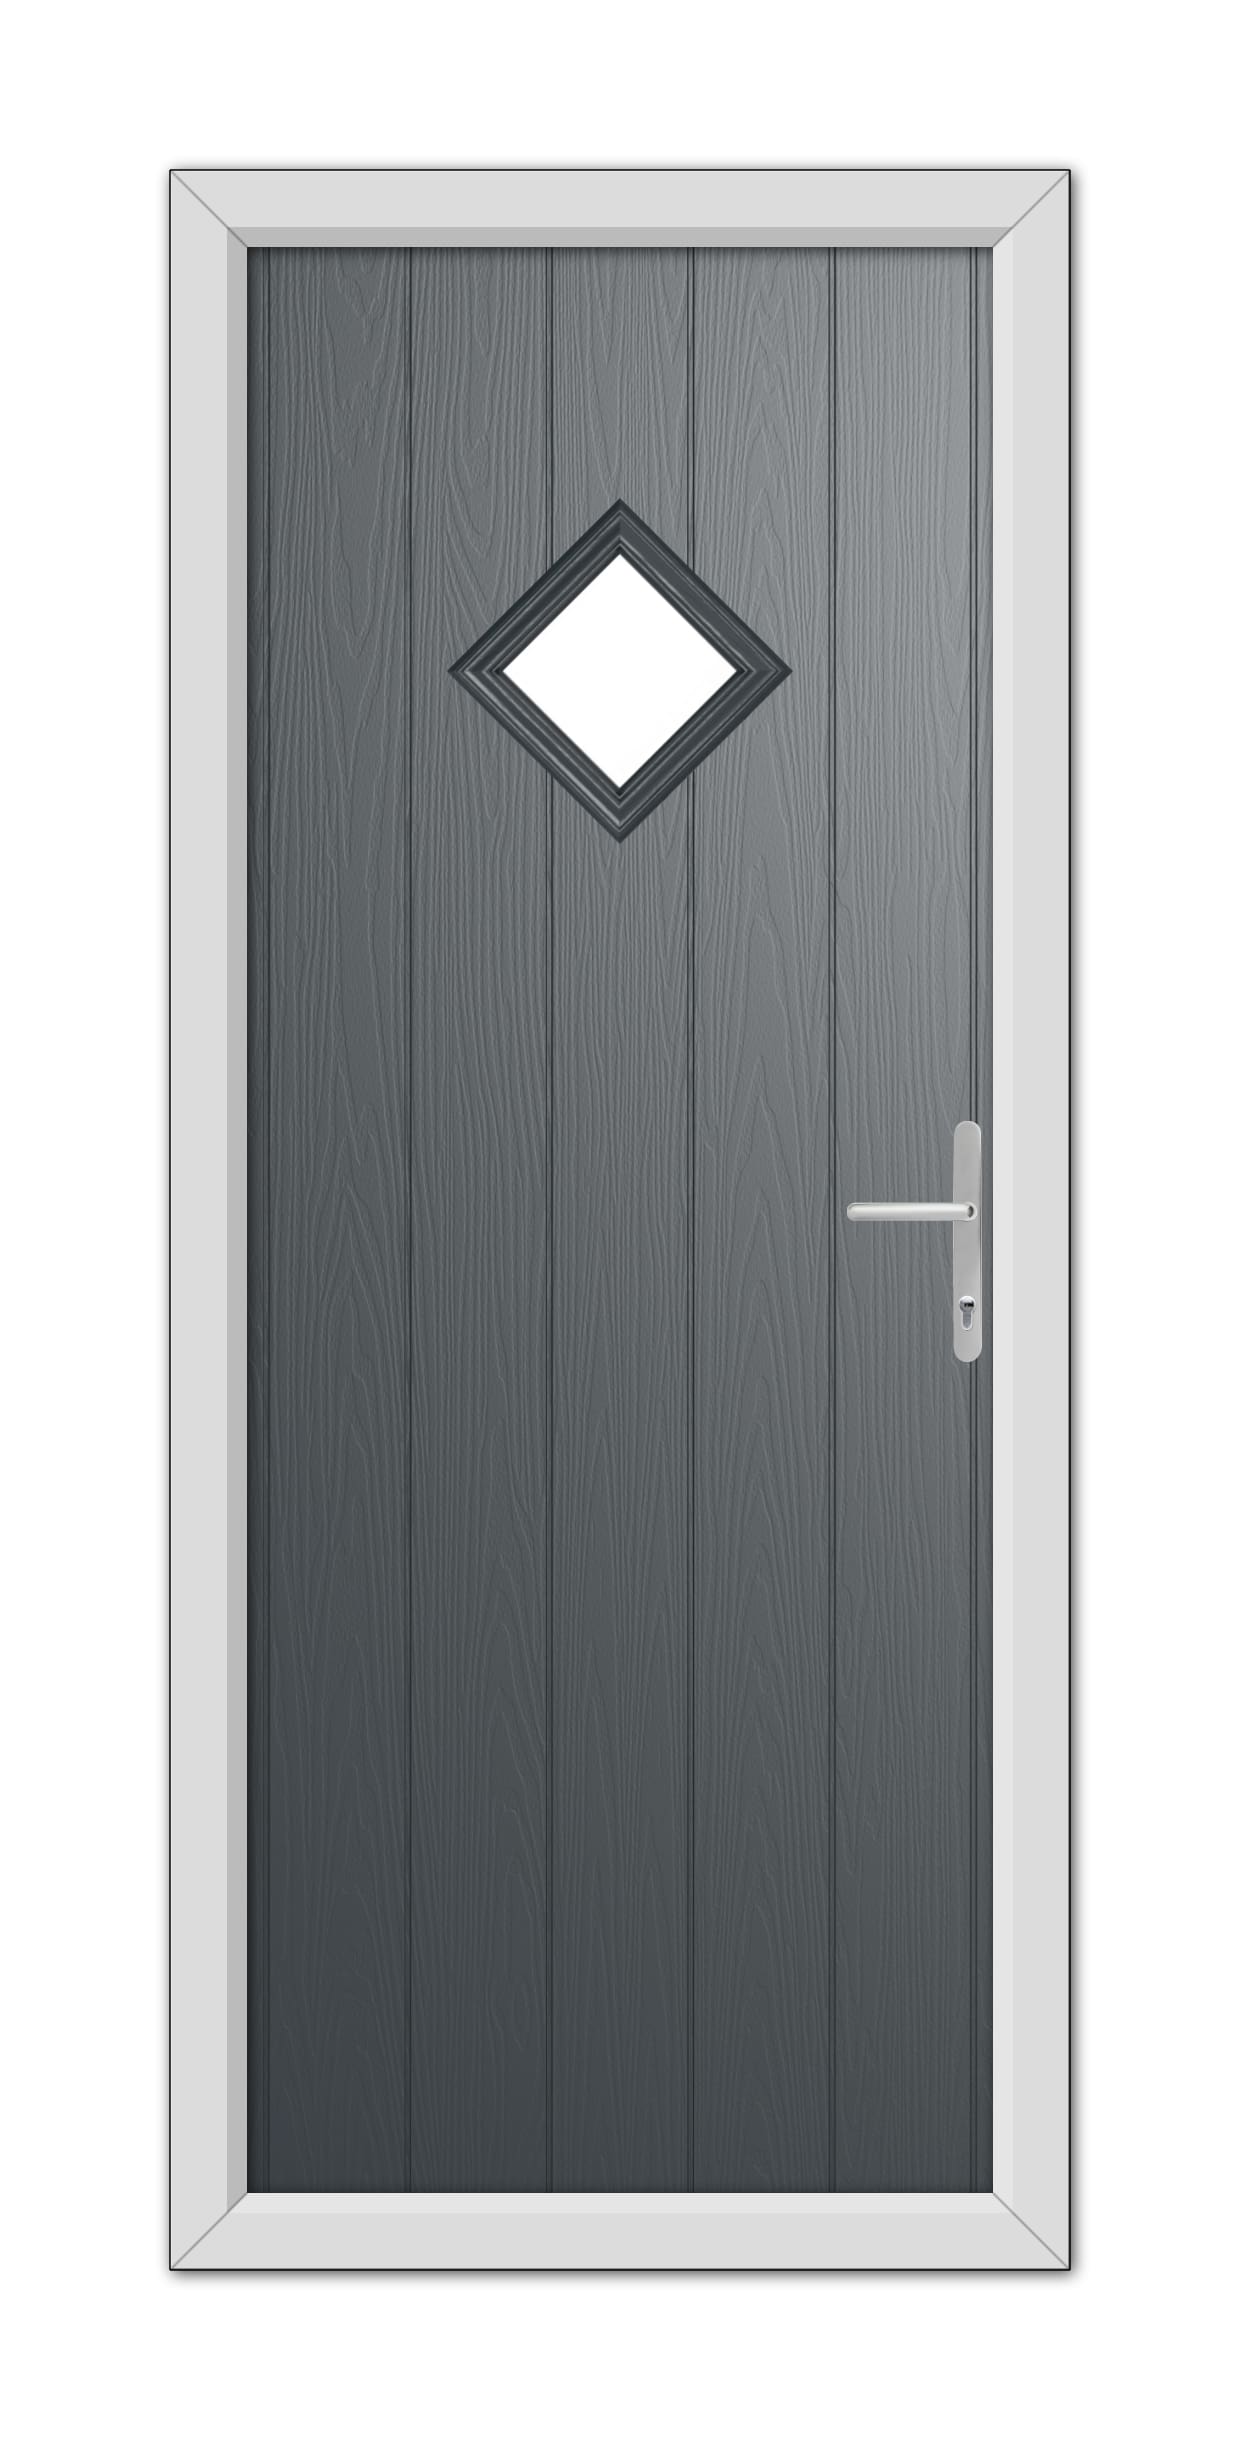 A modern Anthracite Grey Cornwall Composite Door with a diamond-shaped window and a silver handle, set in a white frame.